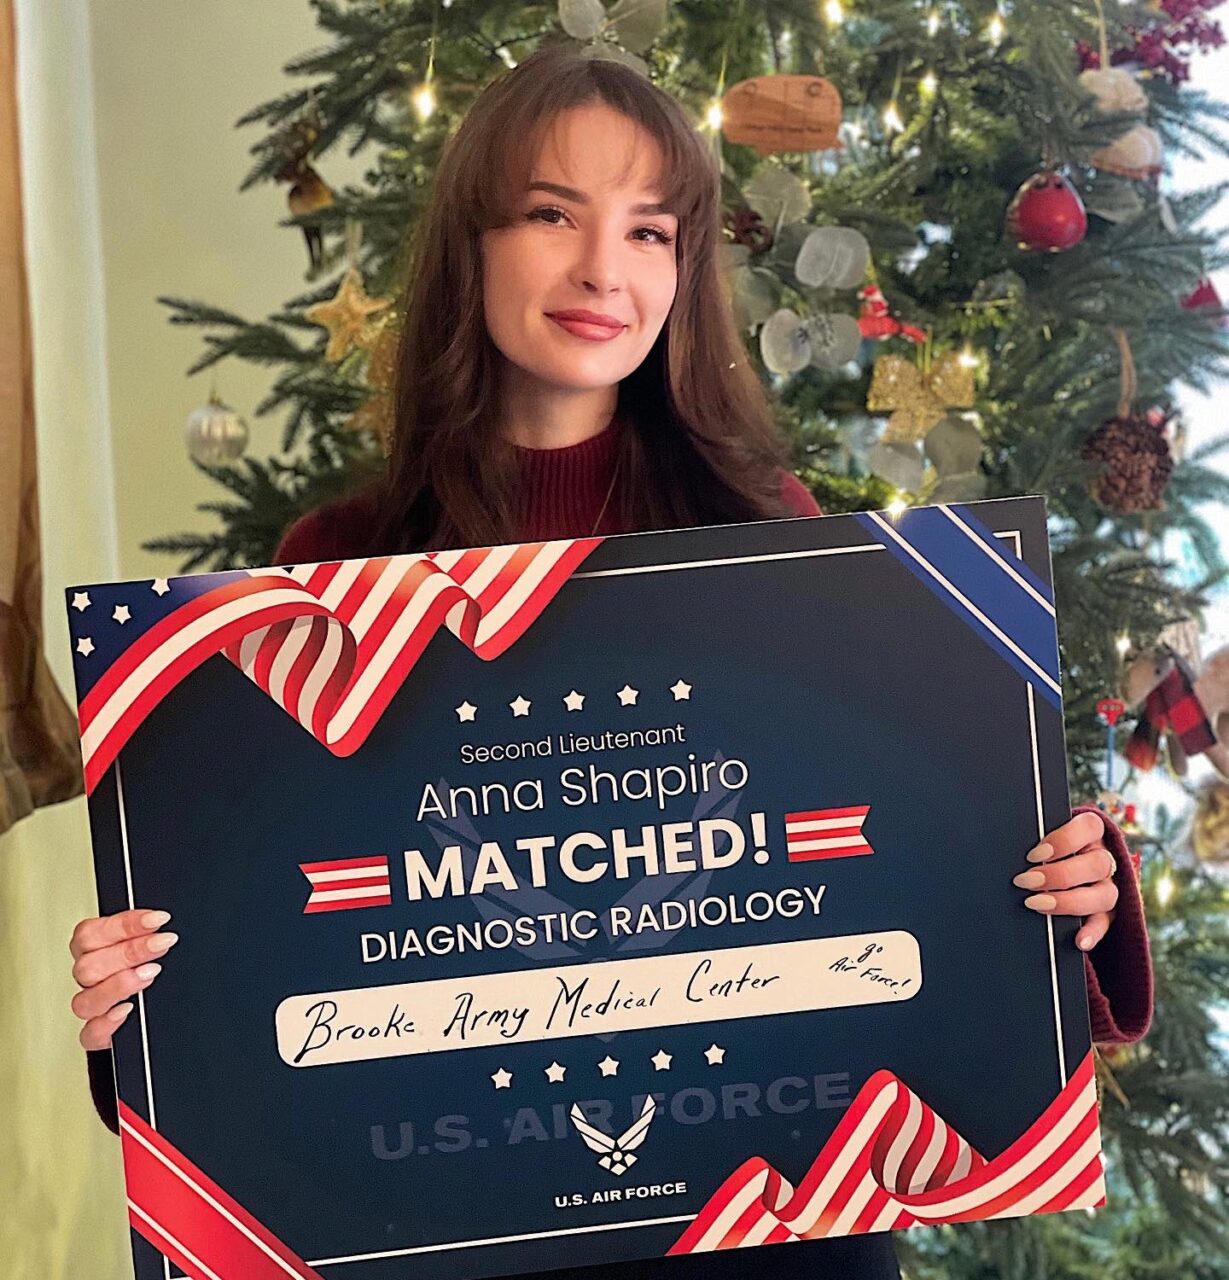 Anna Shapiro: So excited to have matched radiology at Brooke Army Medical Center in San Antonio, Texas